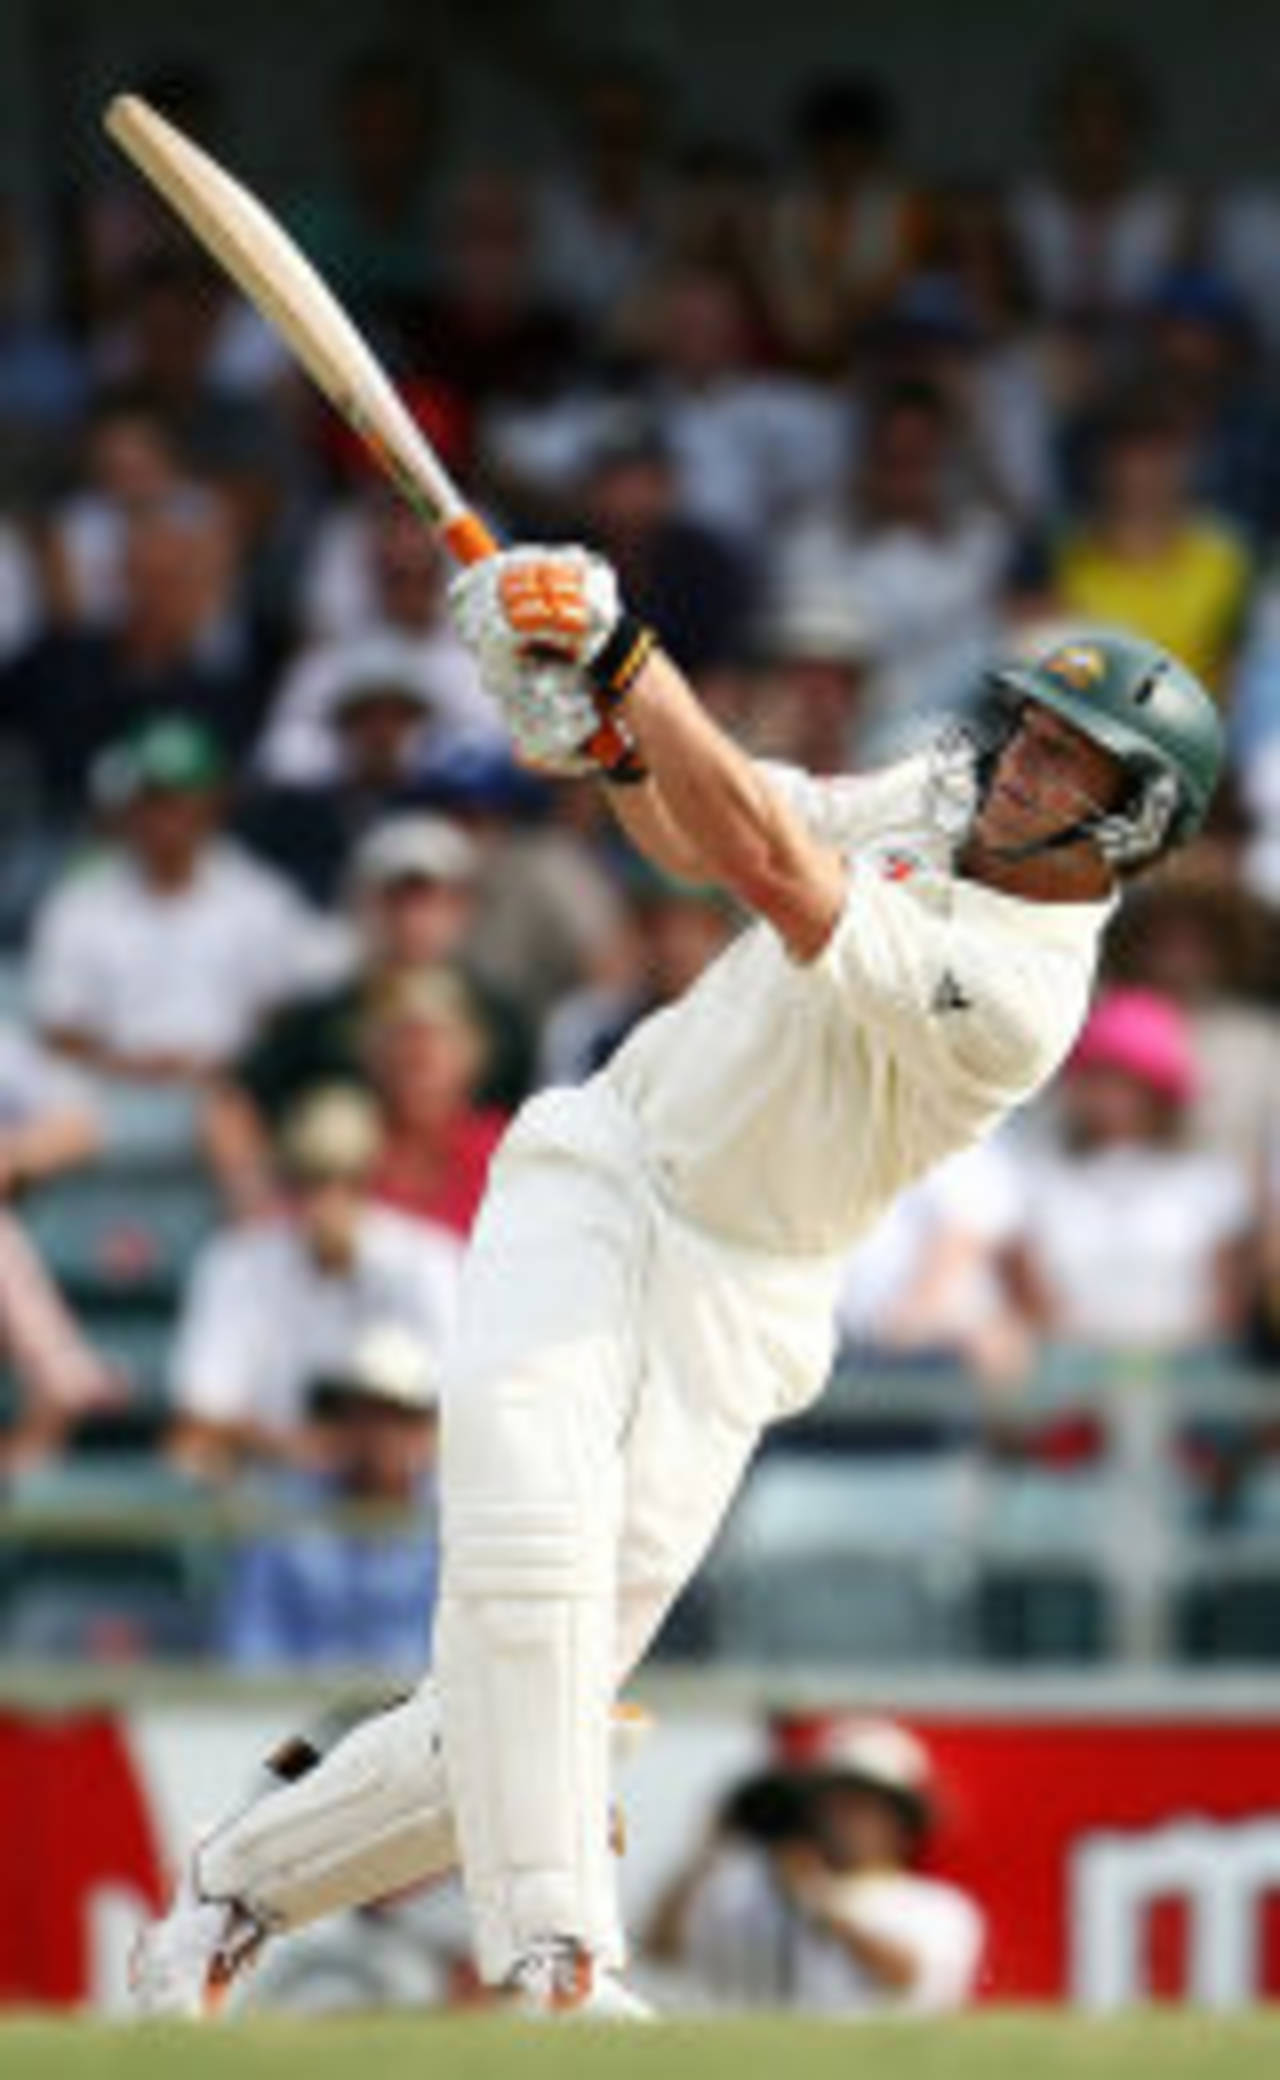 Adam Gilchrist smashes another six during his extraordinary century, Australia v England, 3rd Test, Perth, December 16, 2006